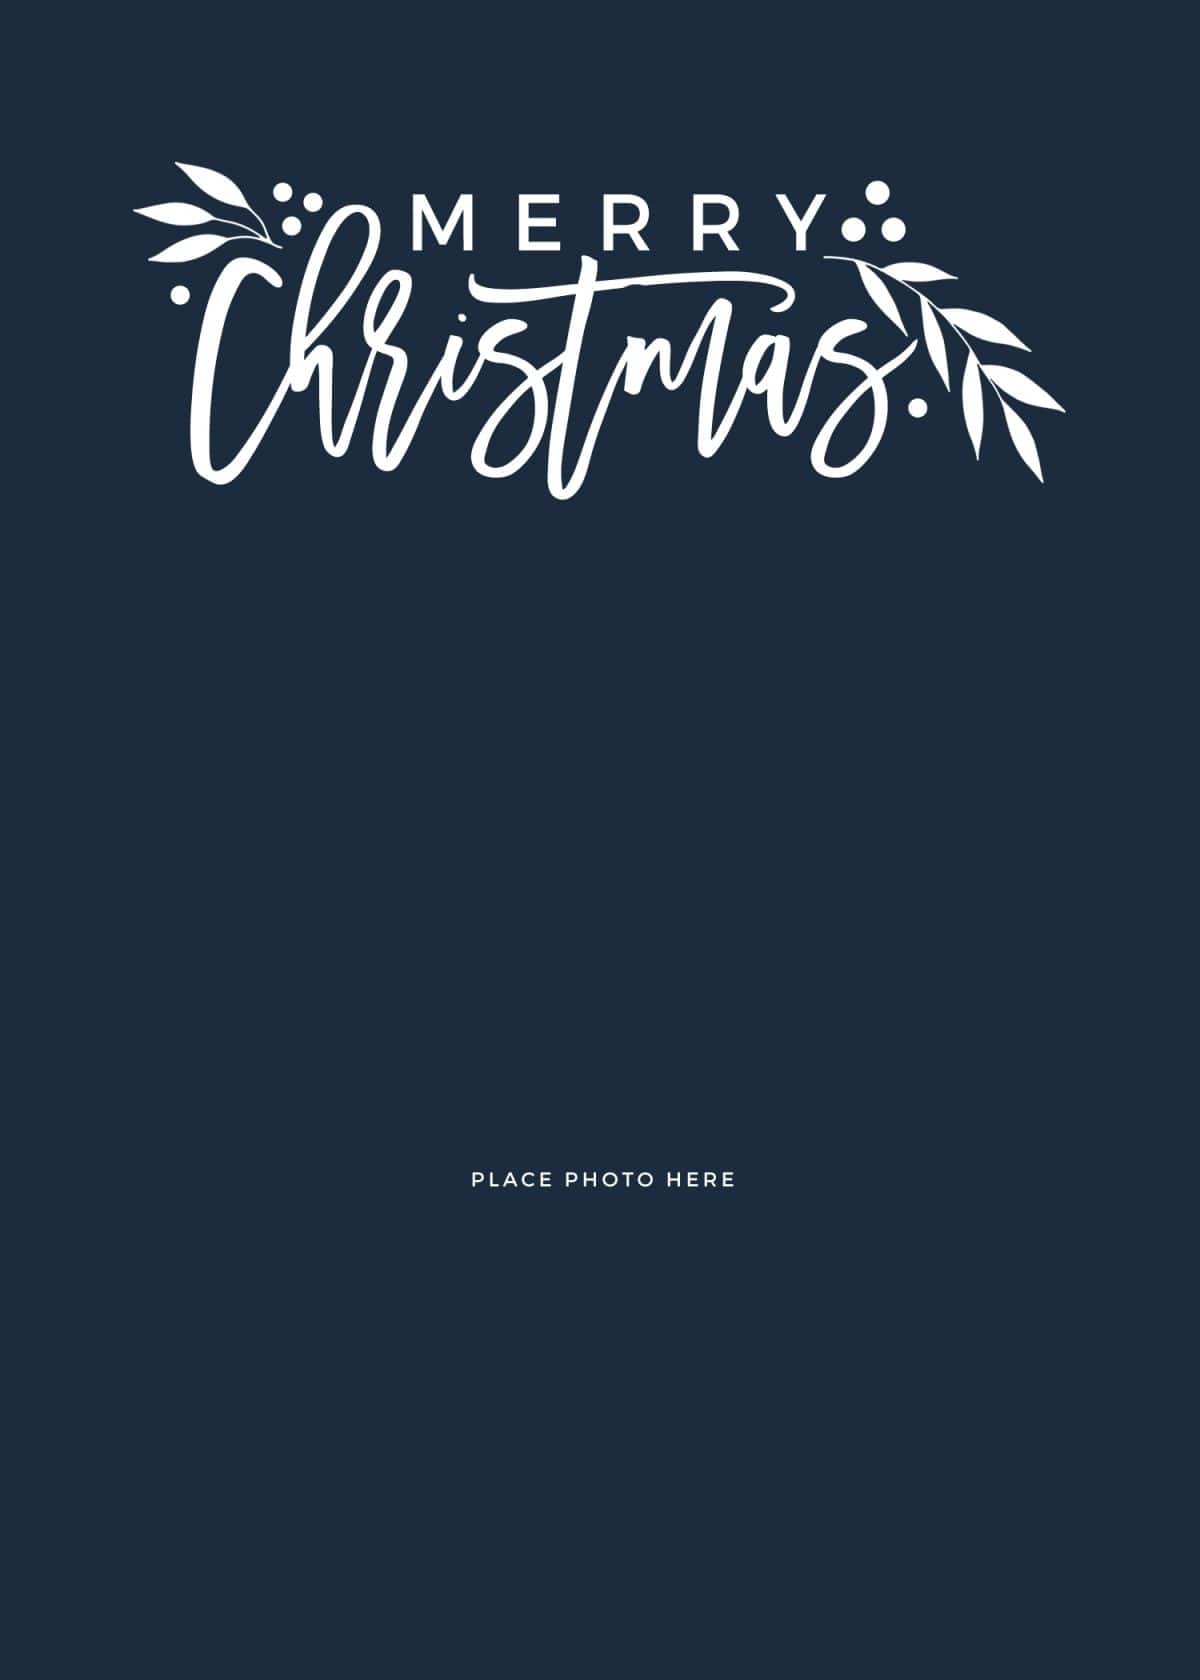 free-christmas-card-template-ideas-somewhat-simple